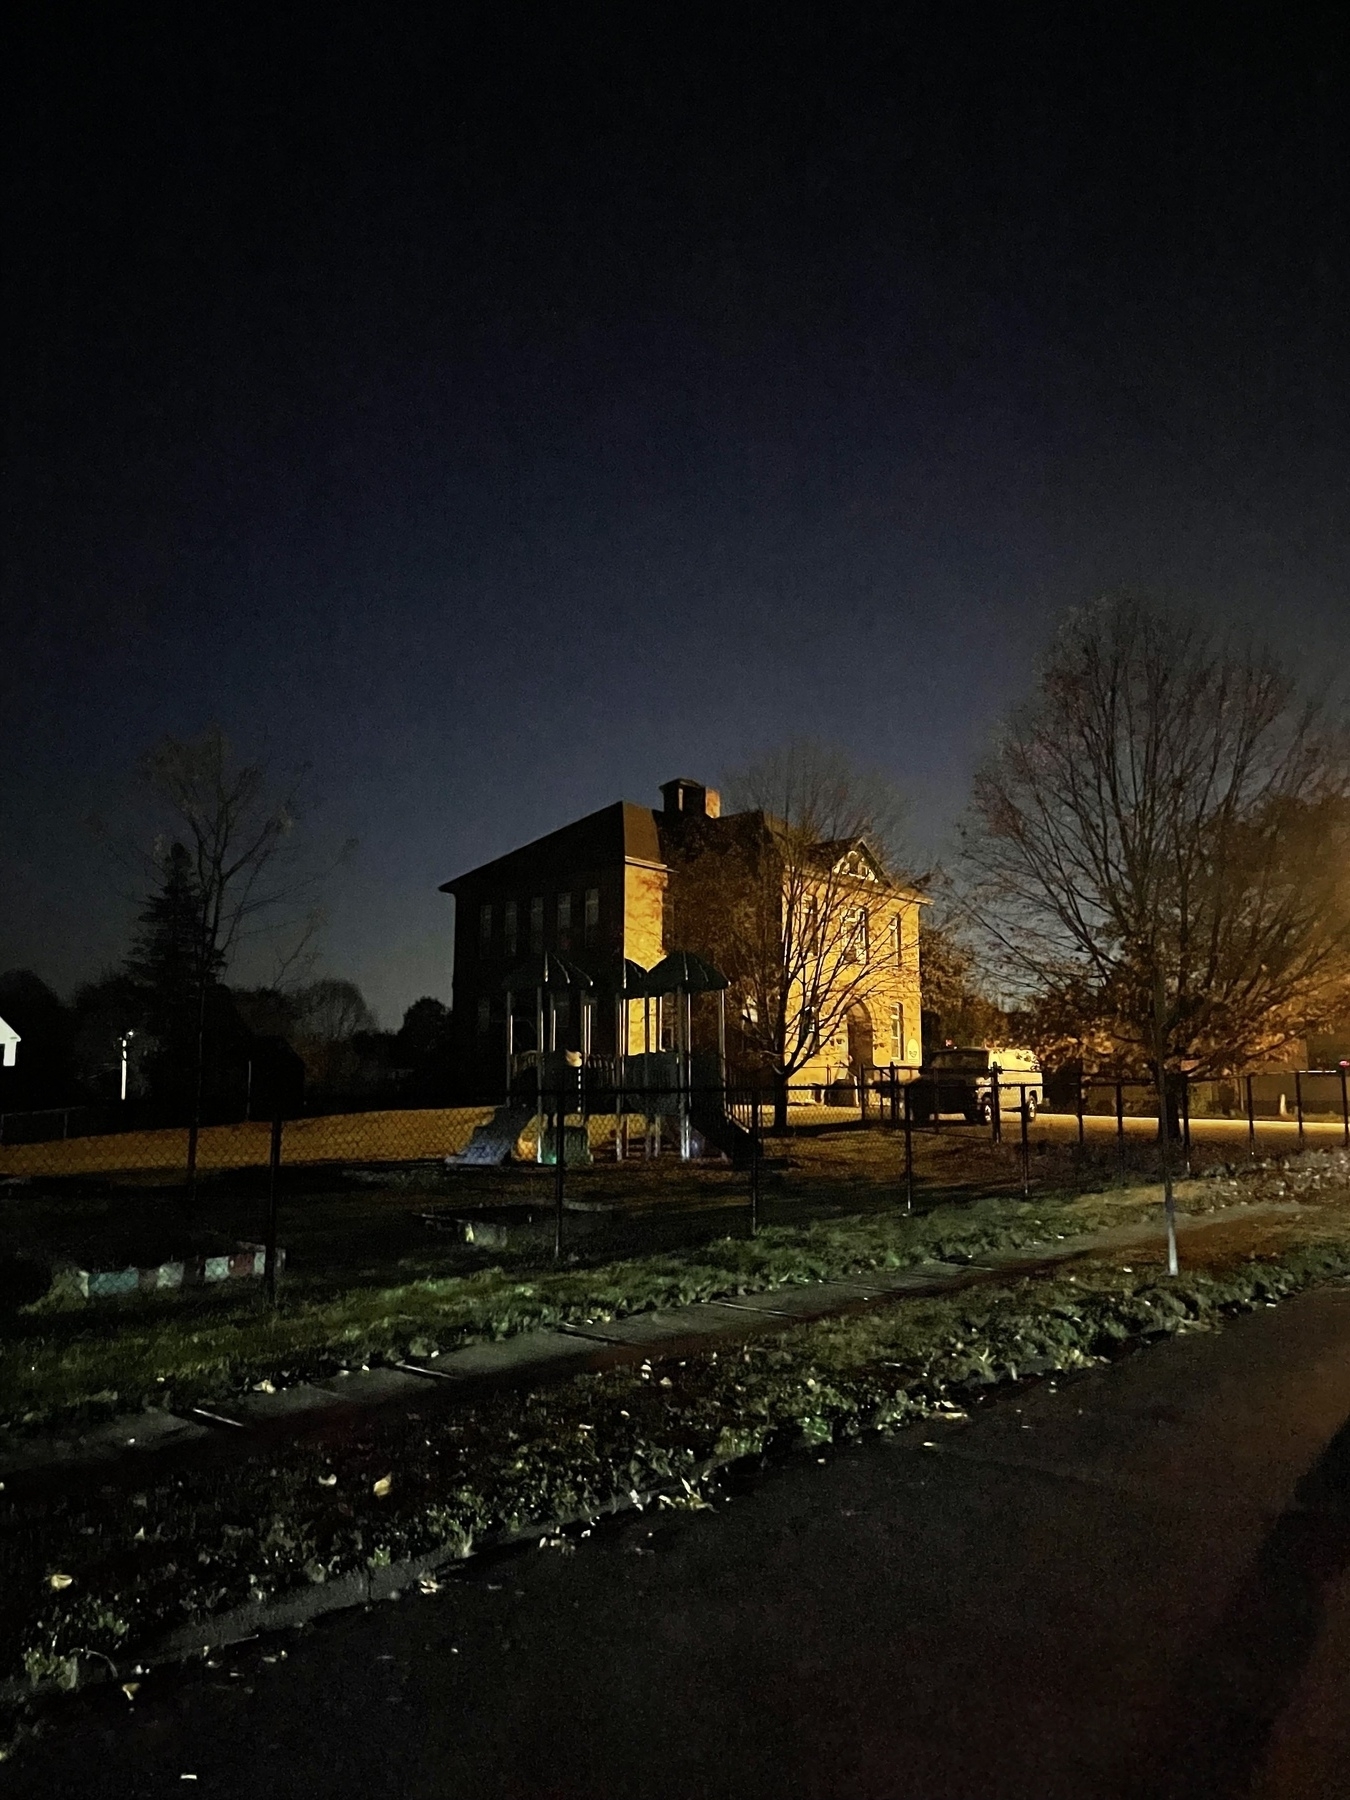 Brick building with playground, just before dawn